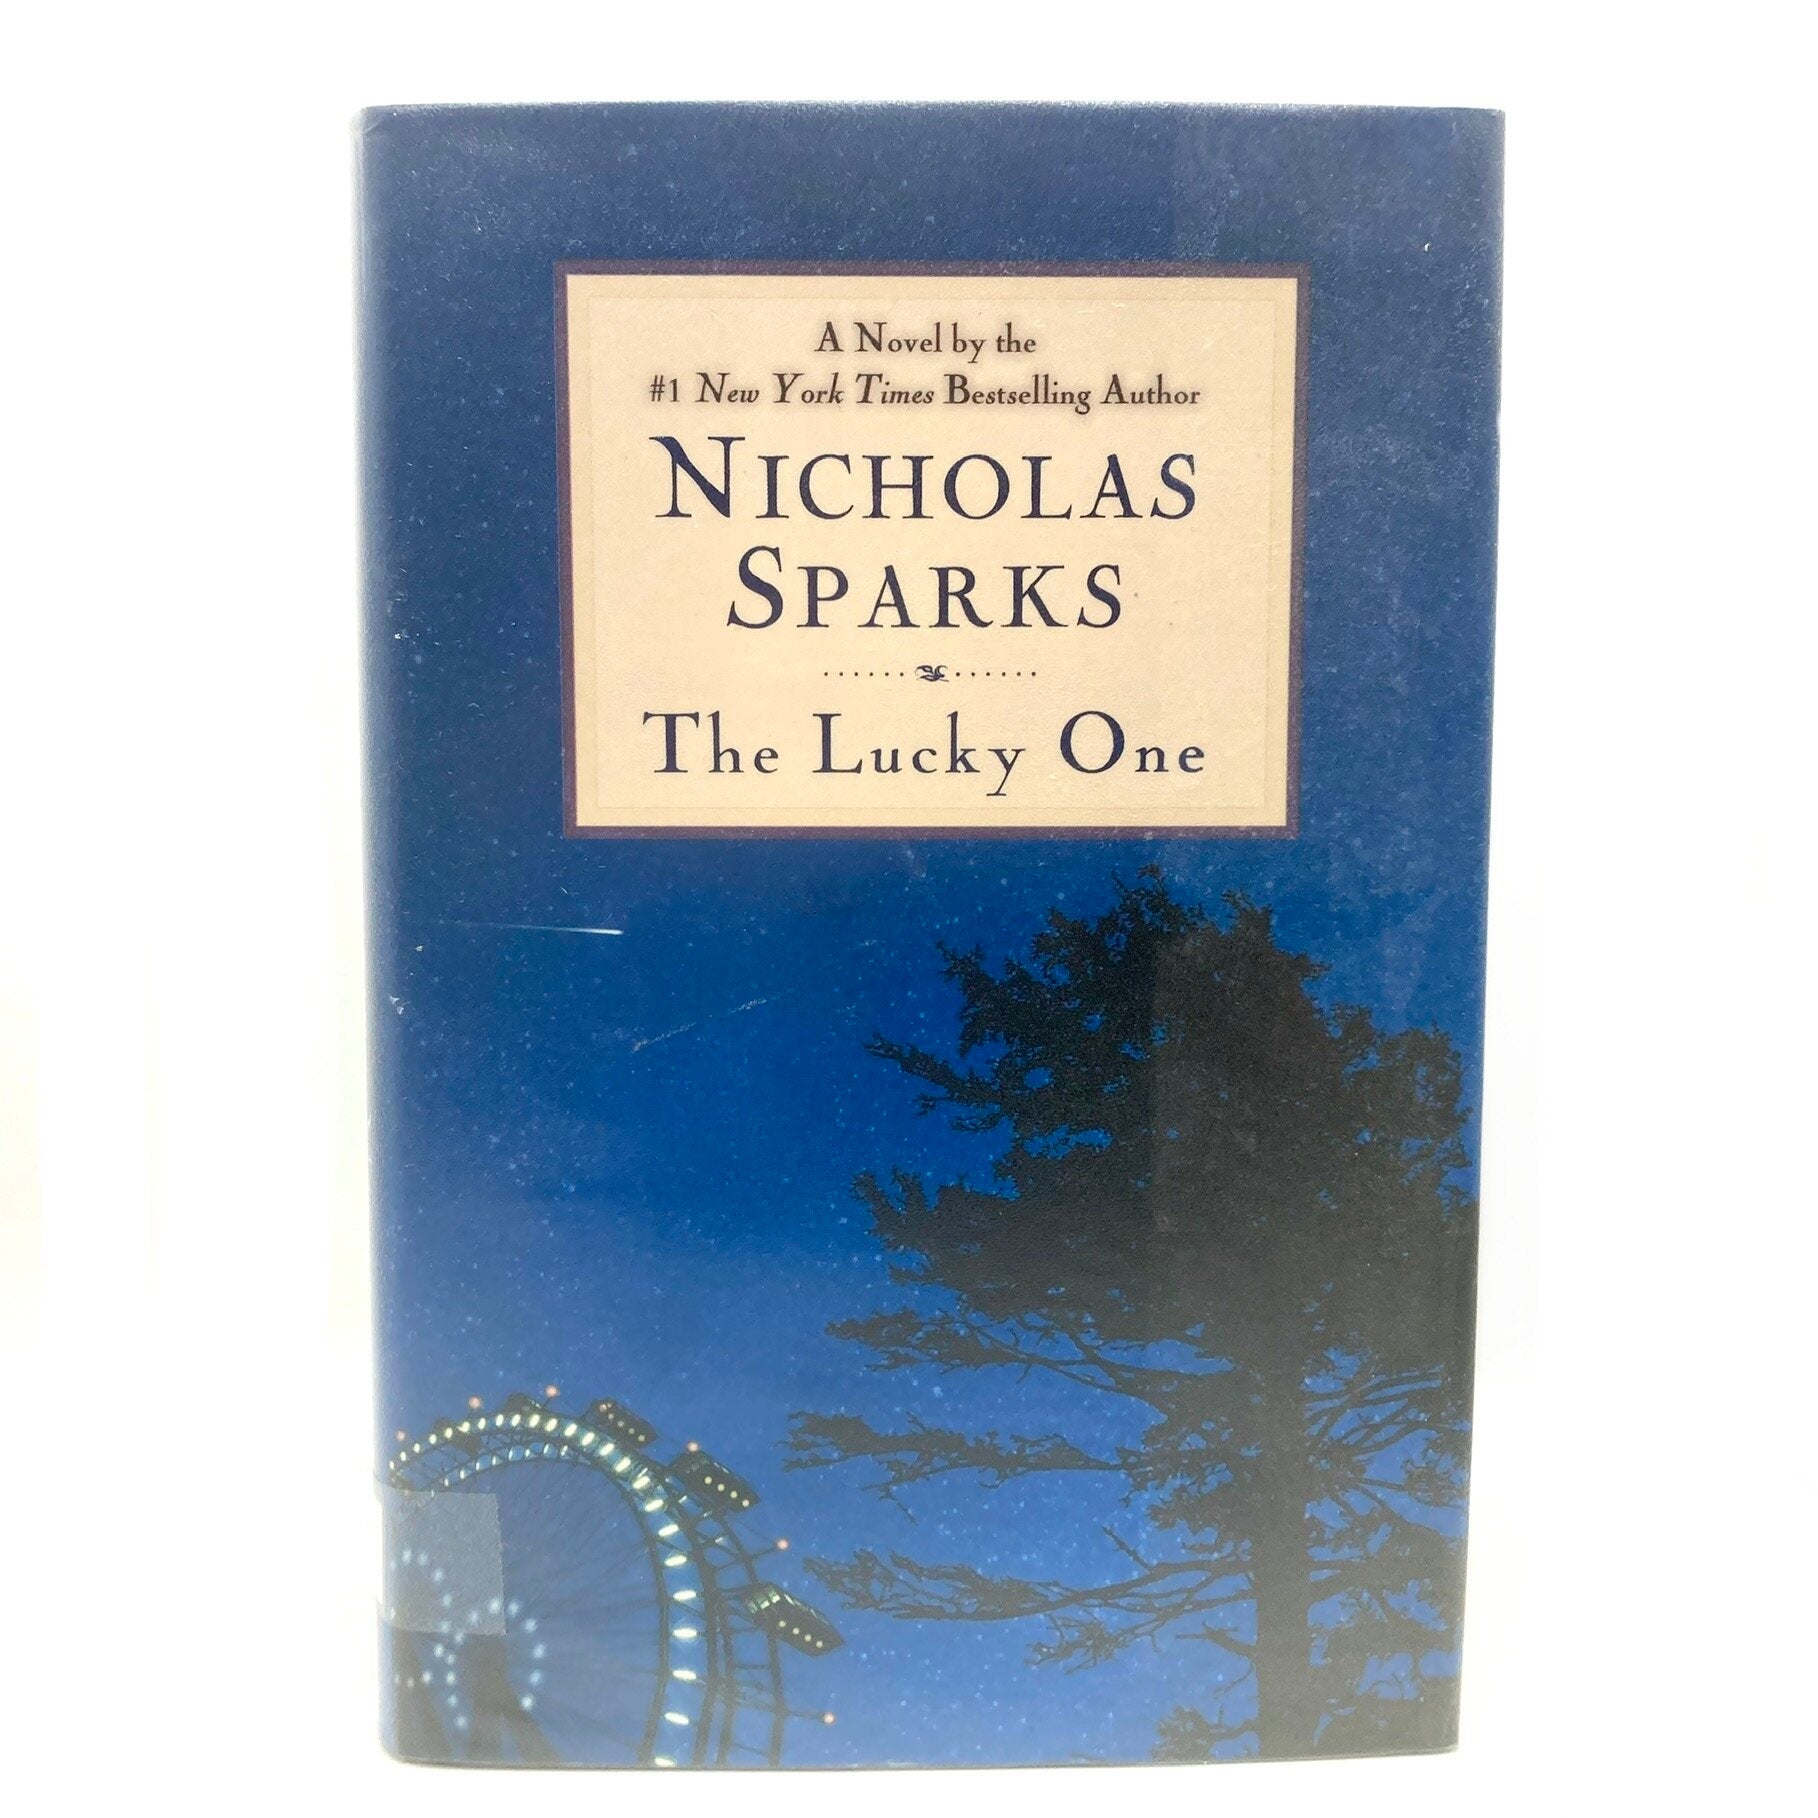 SPARKS, Nicholas "The Lucky One" [Grand Central Publishing, 2008] 1st Edition (Signed) - Buzz Bookstore